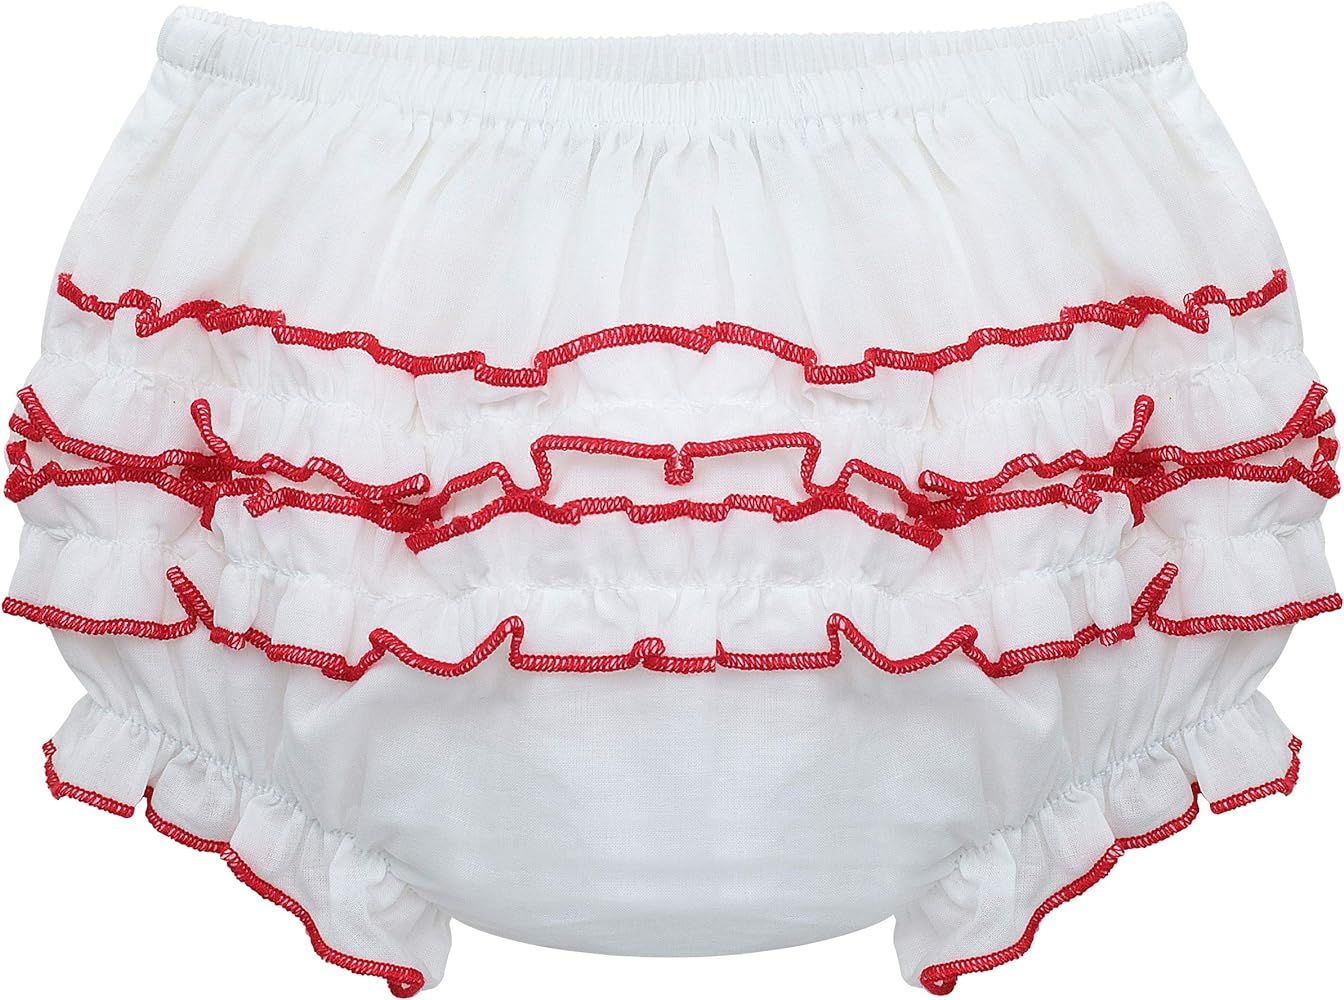 Carriage Boutique Baby Ruffle Panty Diaper Covers For Girls - Classic Baby Bloomers Diaper Cover - W | Amazon (US)